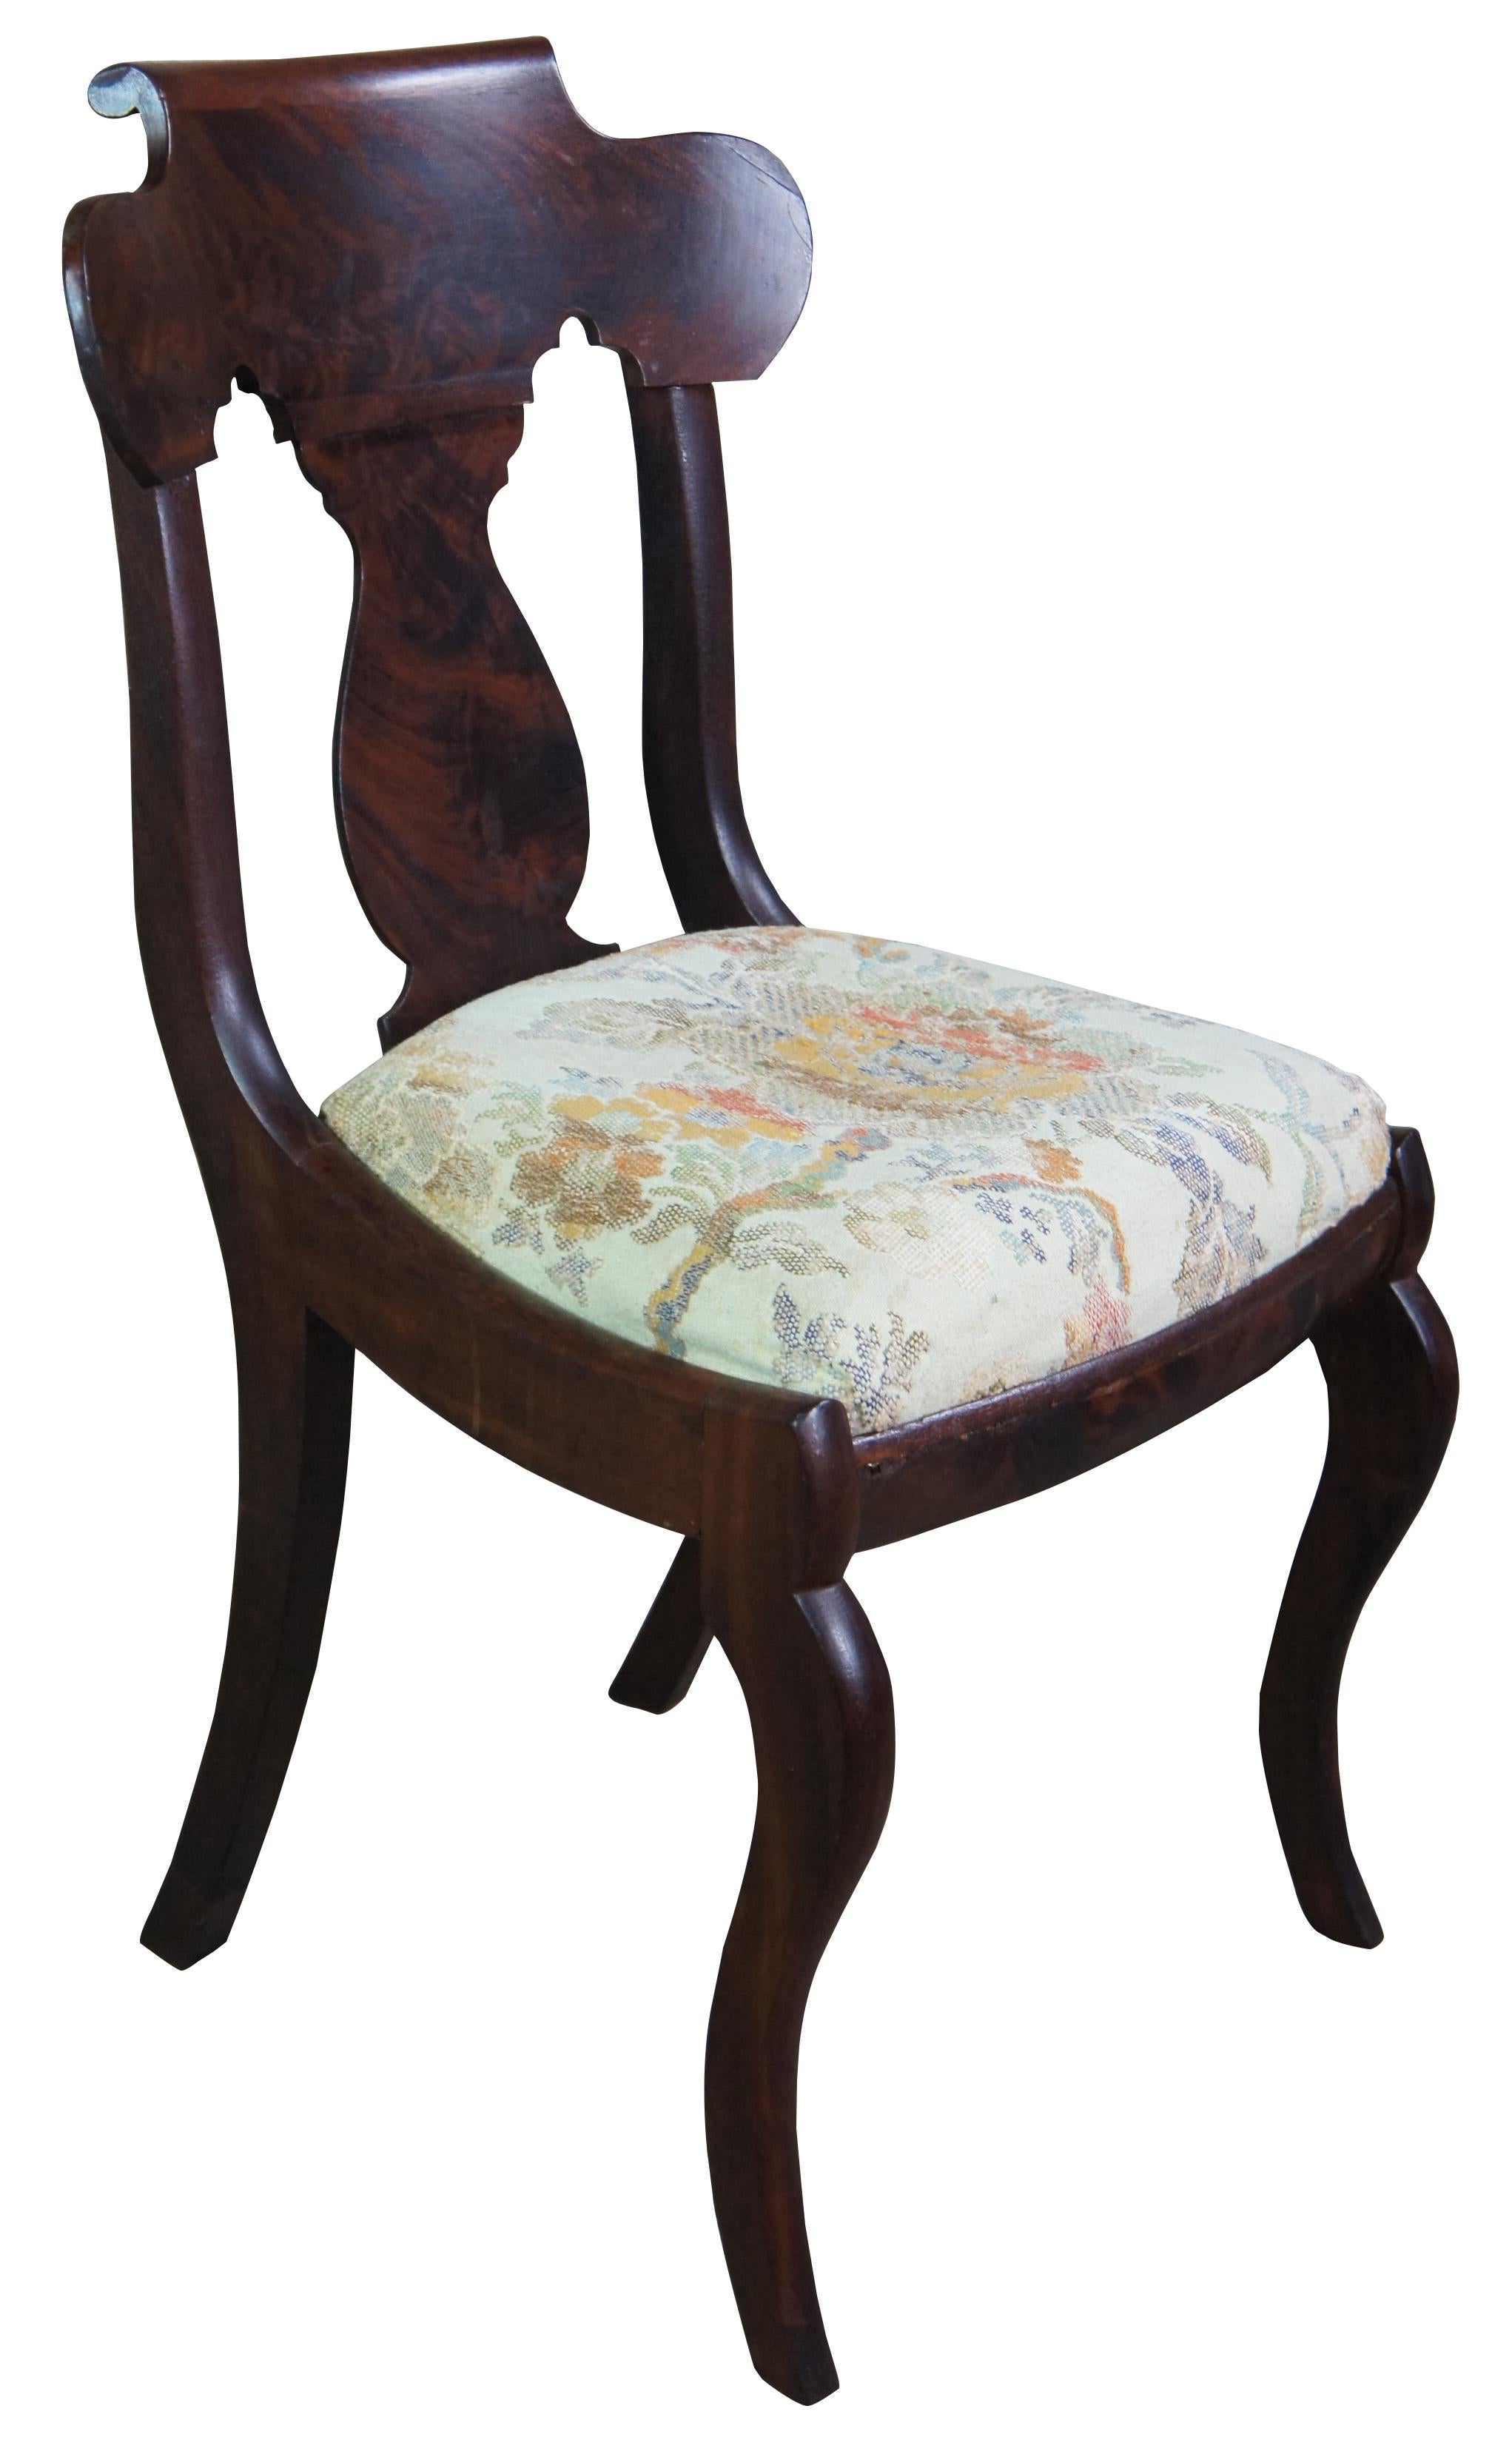 Antique American Empire parlor, vanity or side dining chair. Made of flamed mahogany featuring serpentine form with trophy urn shaped back splat, needlepoint (burlap woven) seat and serpentine legs.
 